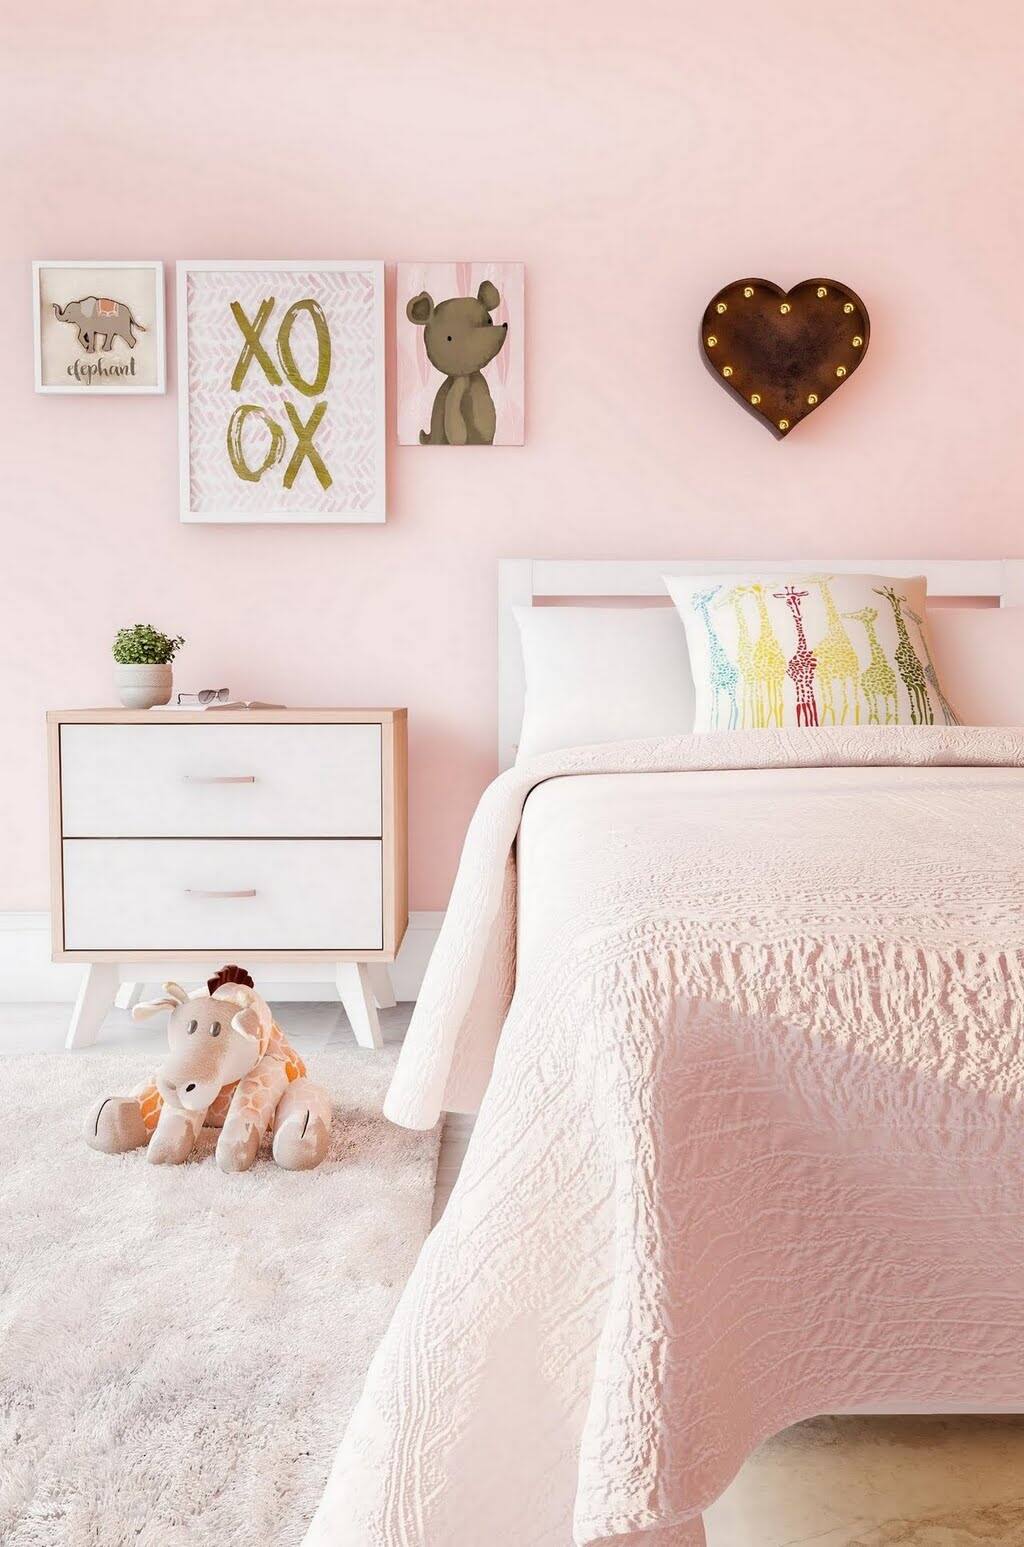 Simply Modern Kids Room - Home - The Home Depot